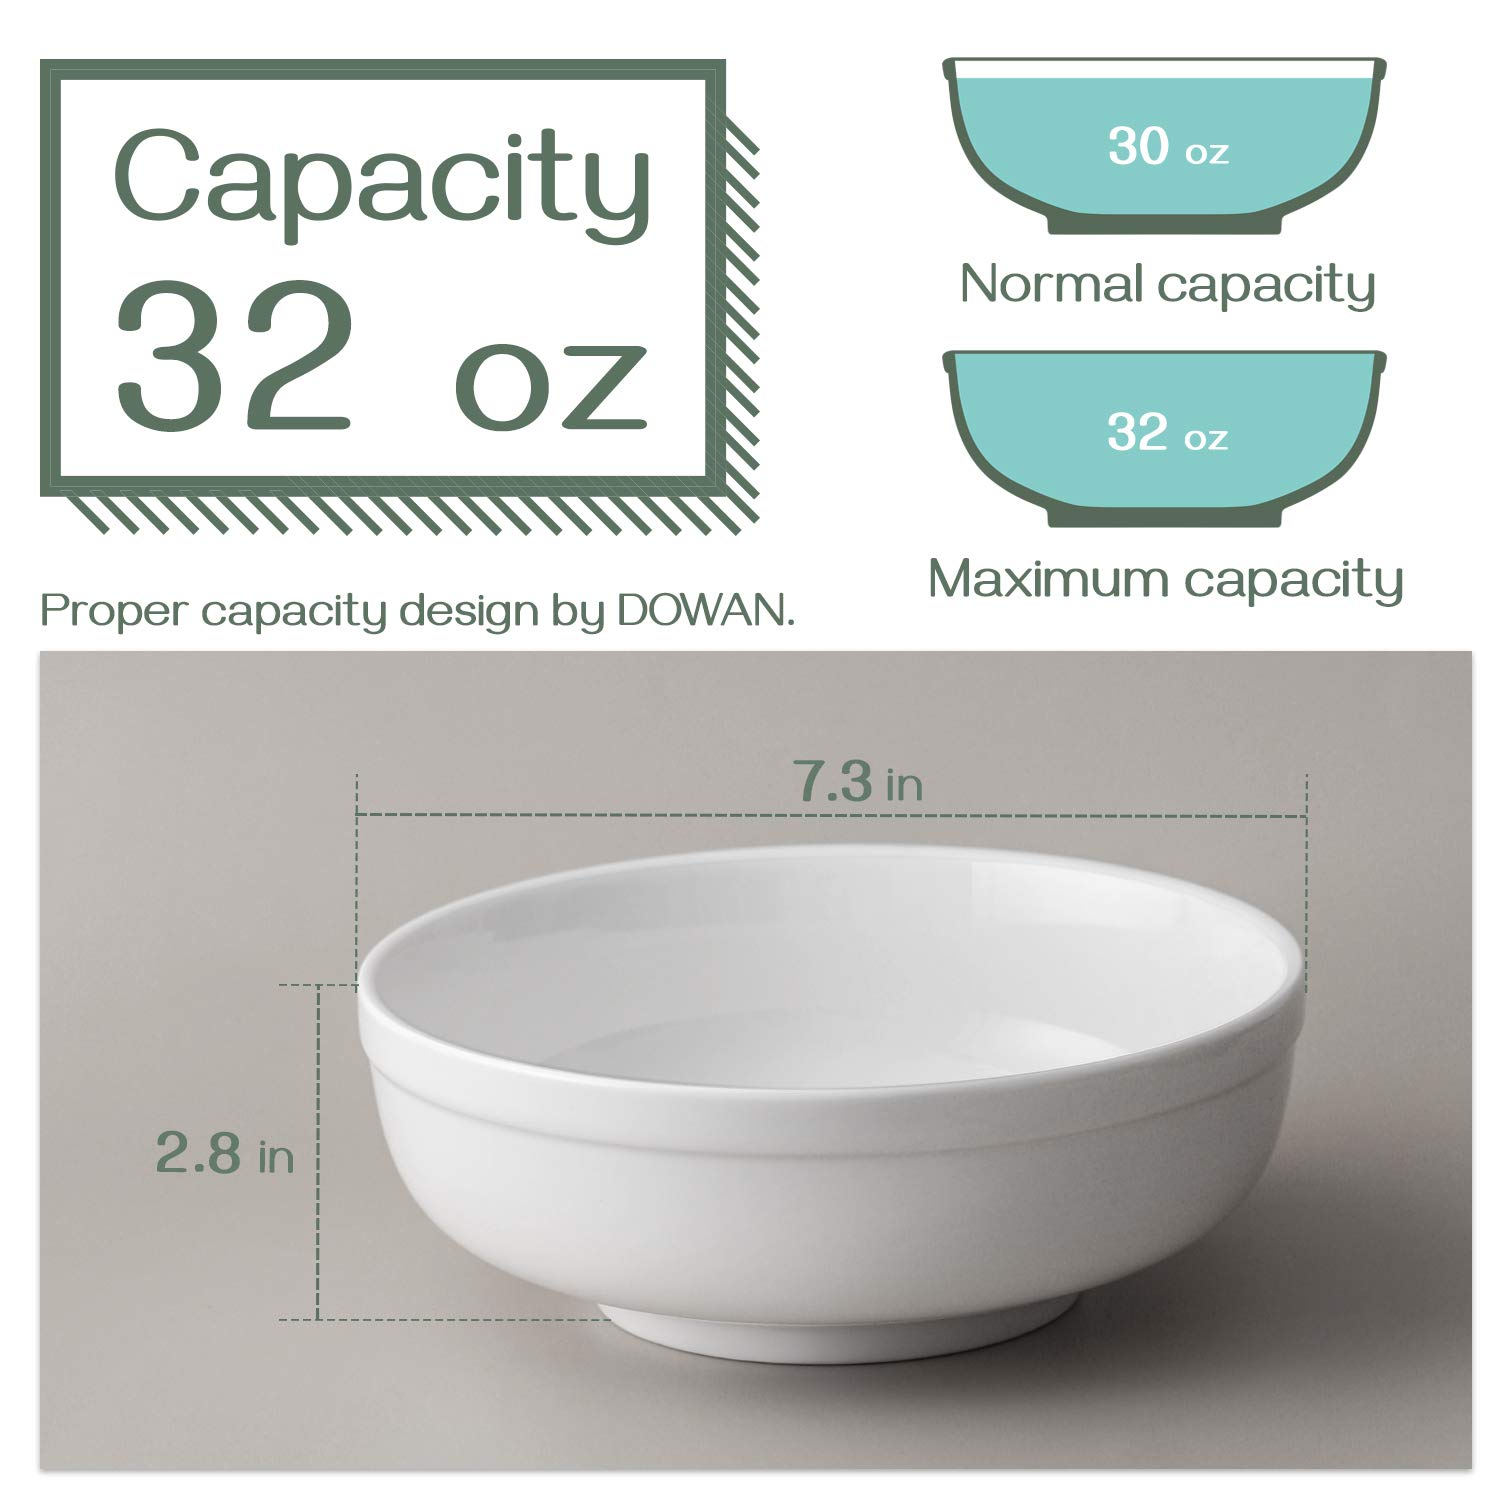 DOWAN Soup Bowls for Kitchen, 32 oz White Bowls for Cereal Salad Ramen Noodle, Porcelain Bowls with Non-slip Design, Sturdy and Easy to Hold, Set of 3, 7.25 Inch